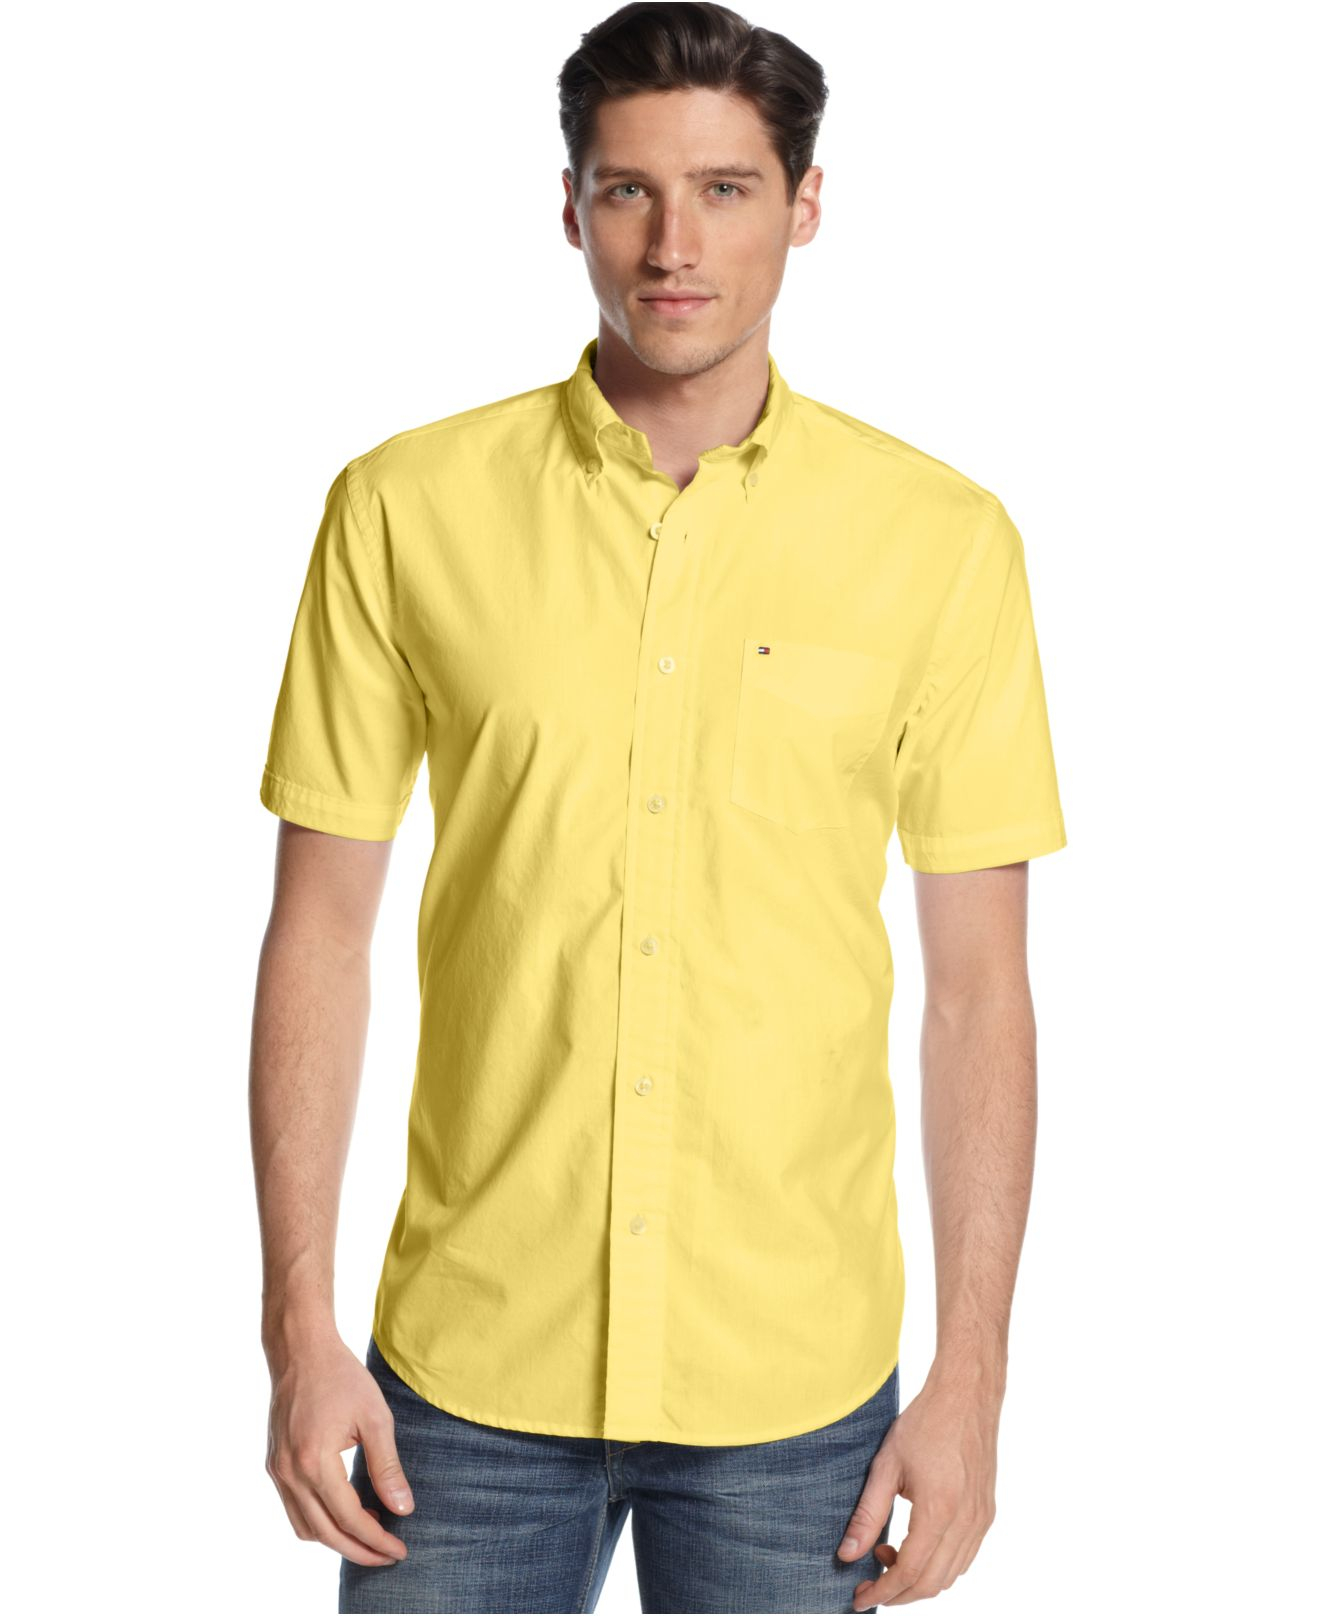 Tommy Hilfiger Short Sleeve Maxwell Shirt in Yellow for Men - Lyst